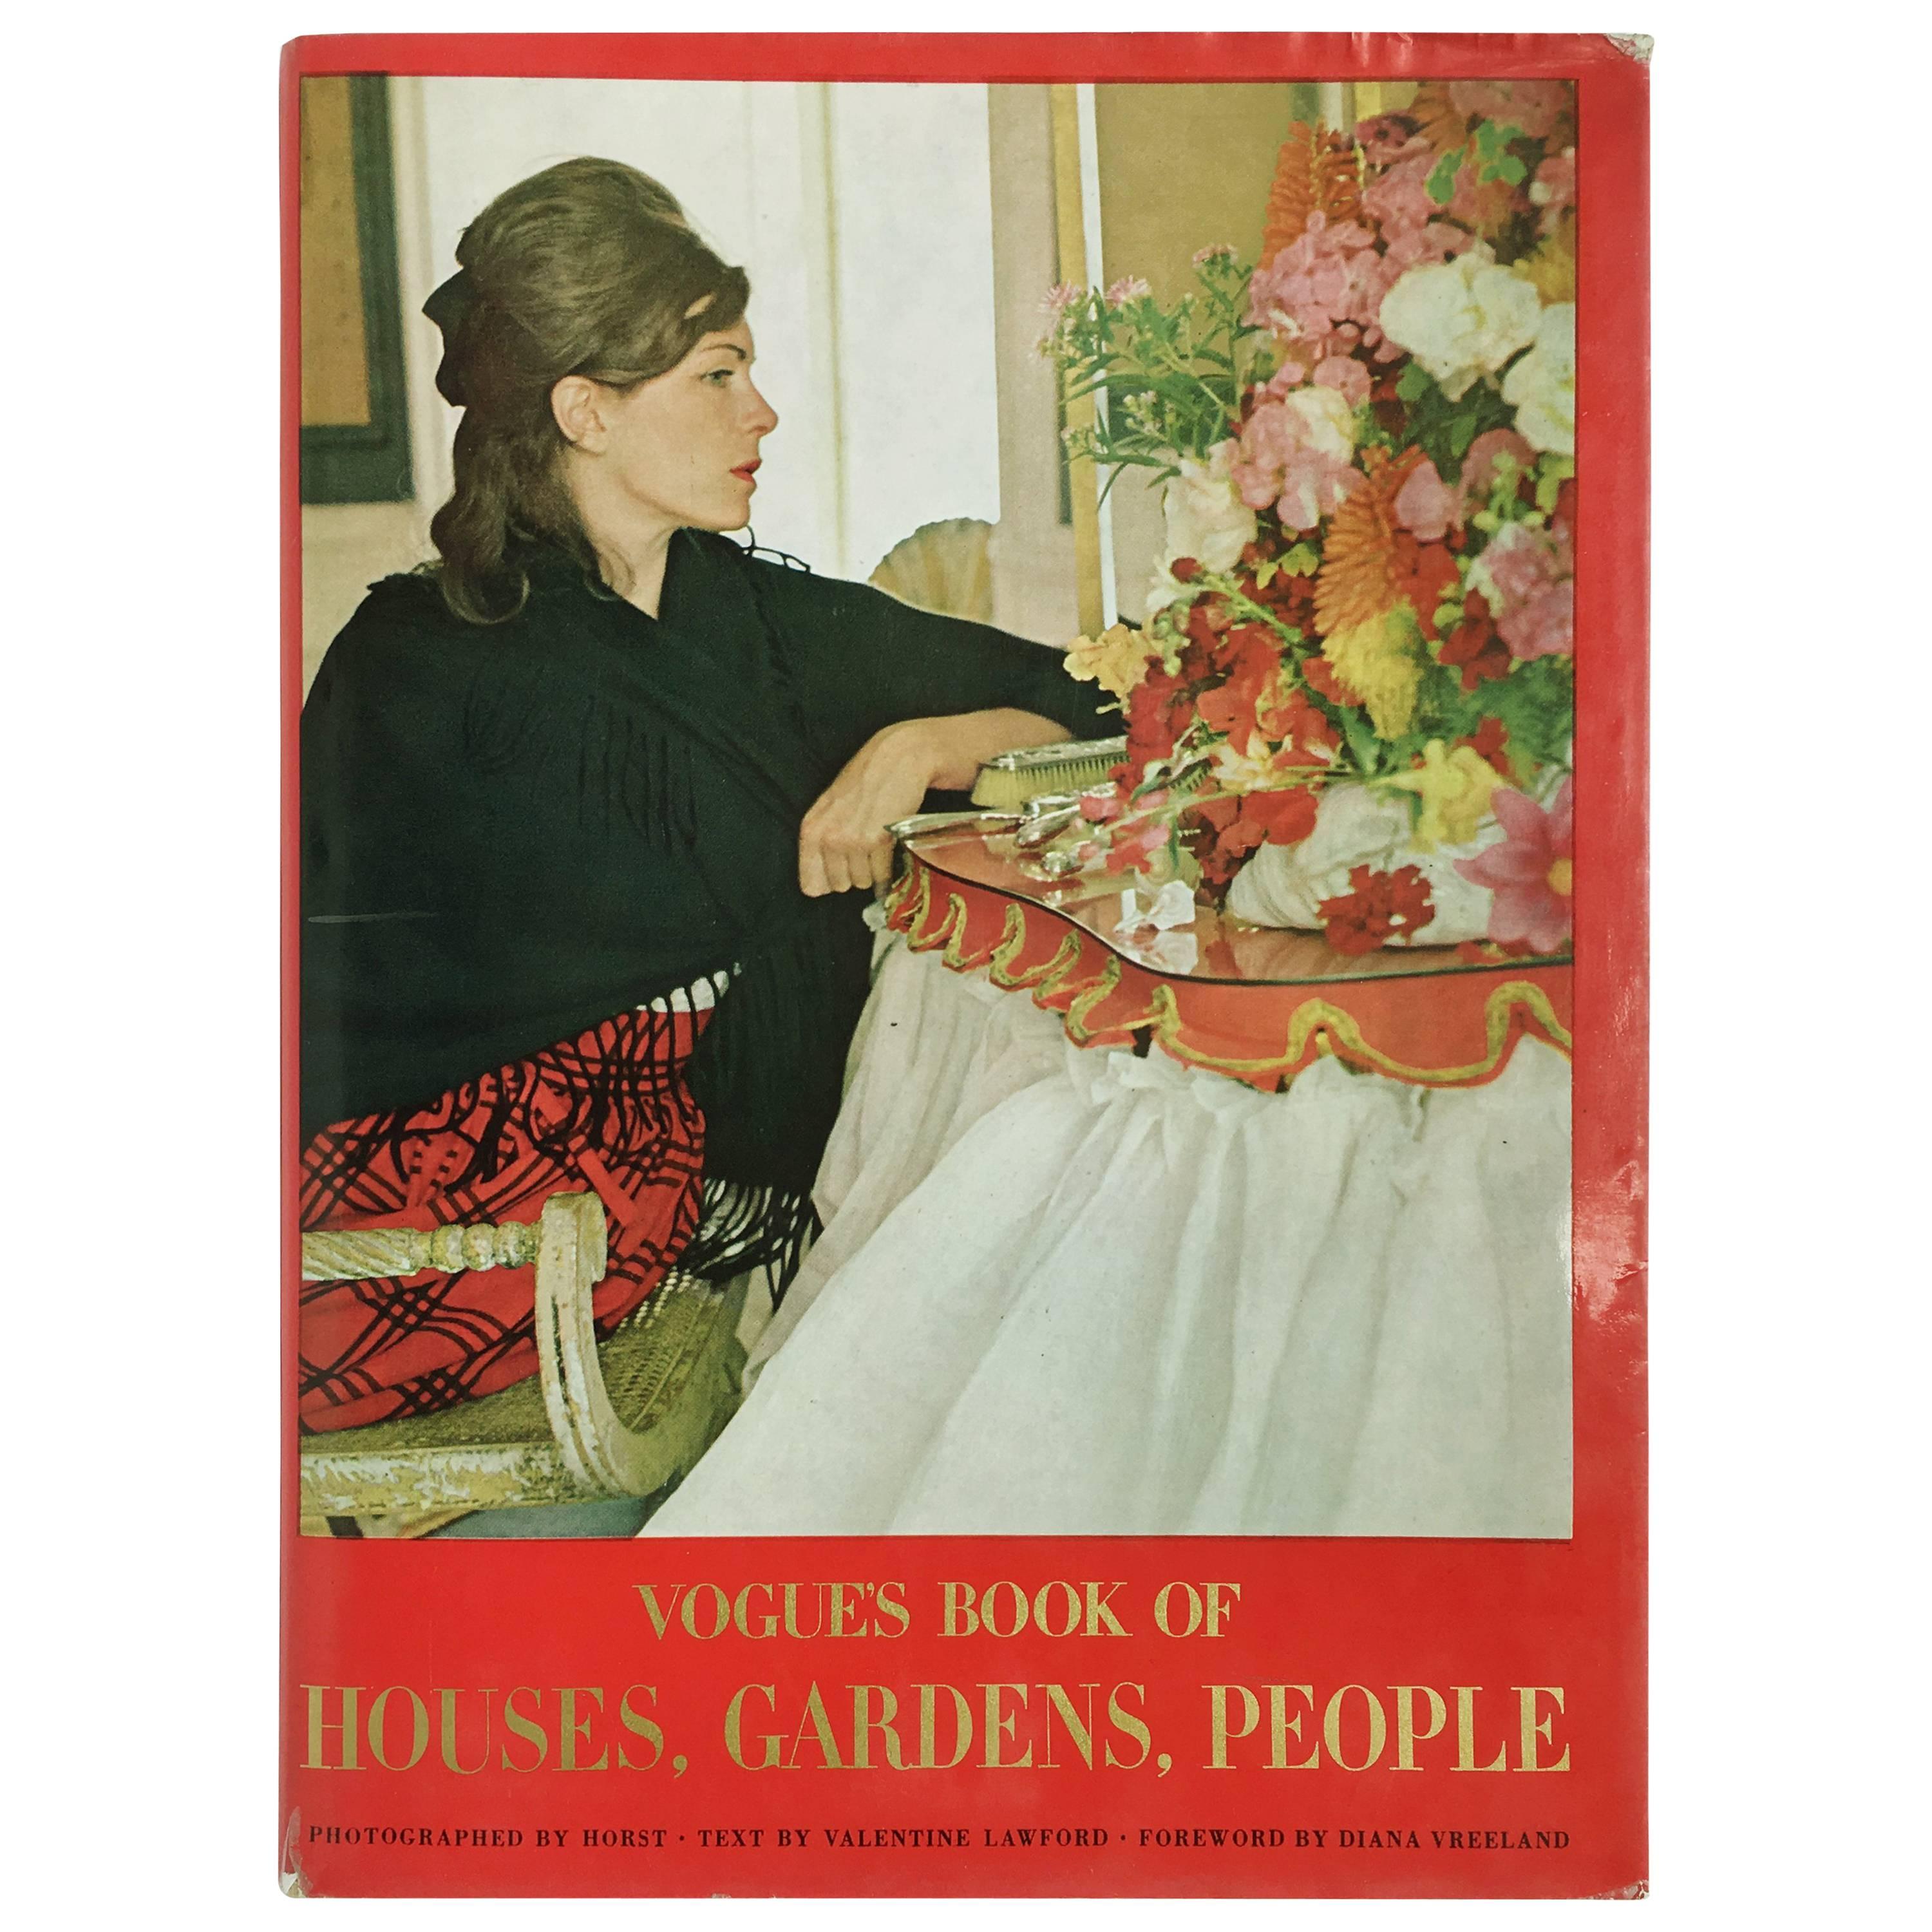 Horst P. Horst Vogue's Book of Houses, Gardens, People Book 1968